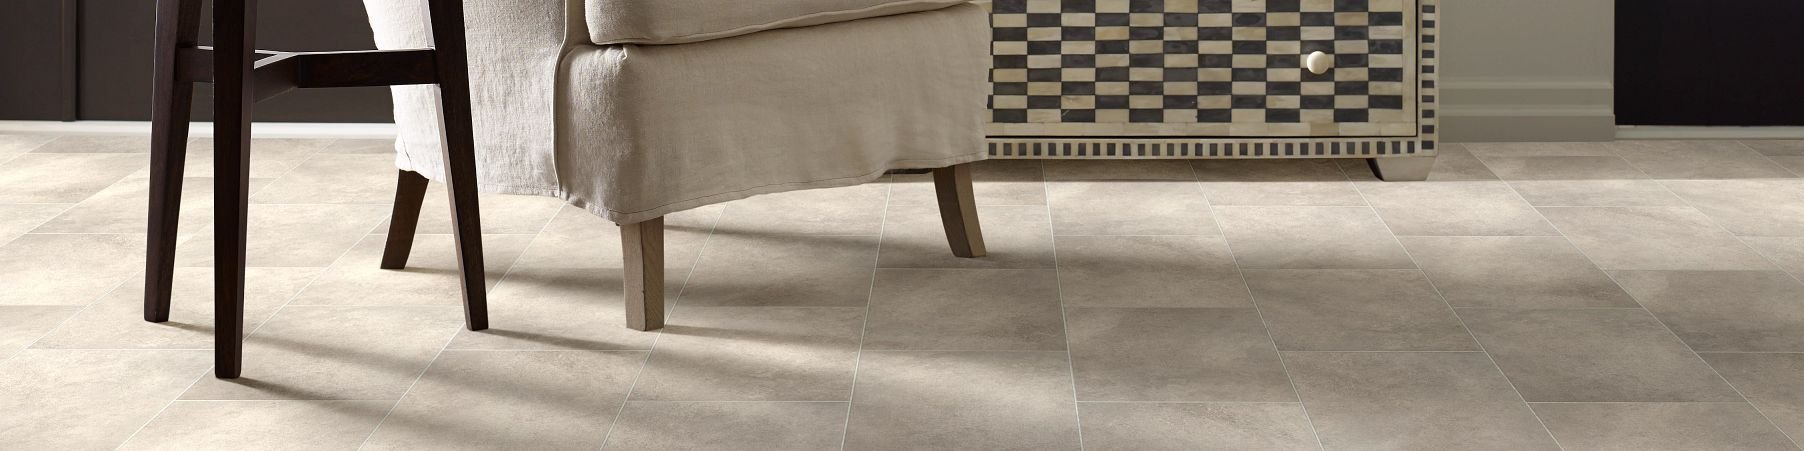 arm chair on tile flooring - Big Dog Flooring in Indianapolis, IN